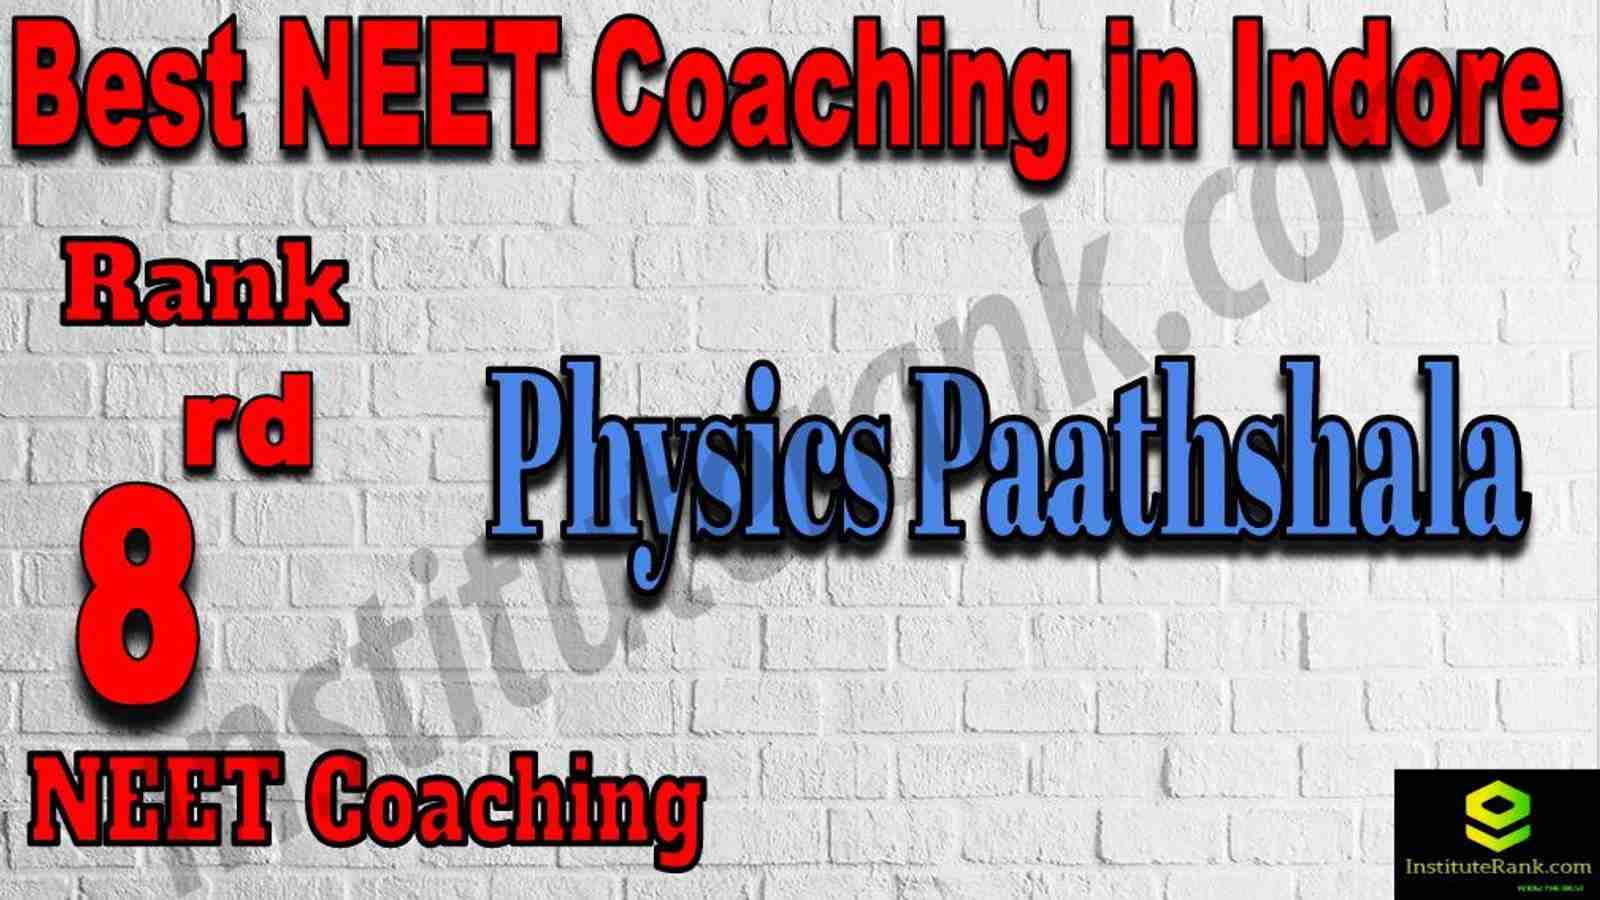 8th Best Neet Coaching in Indore